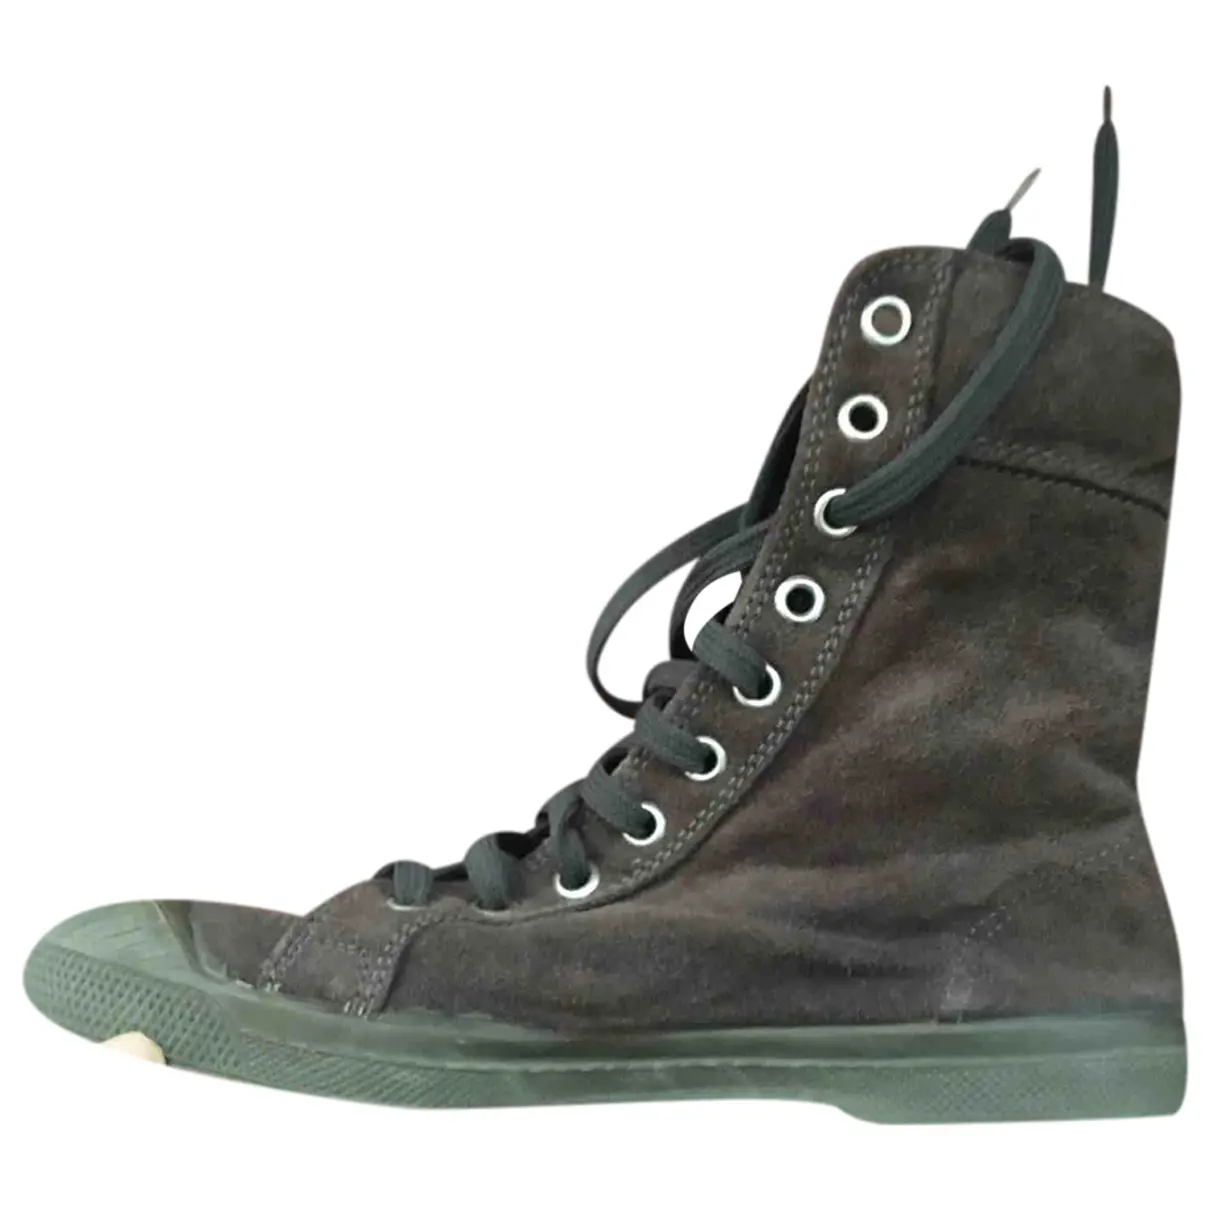 Cloth lace up boots Bensimon